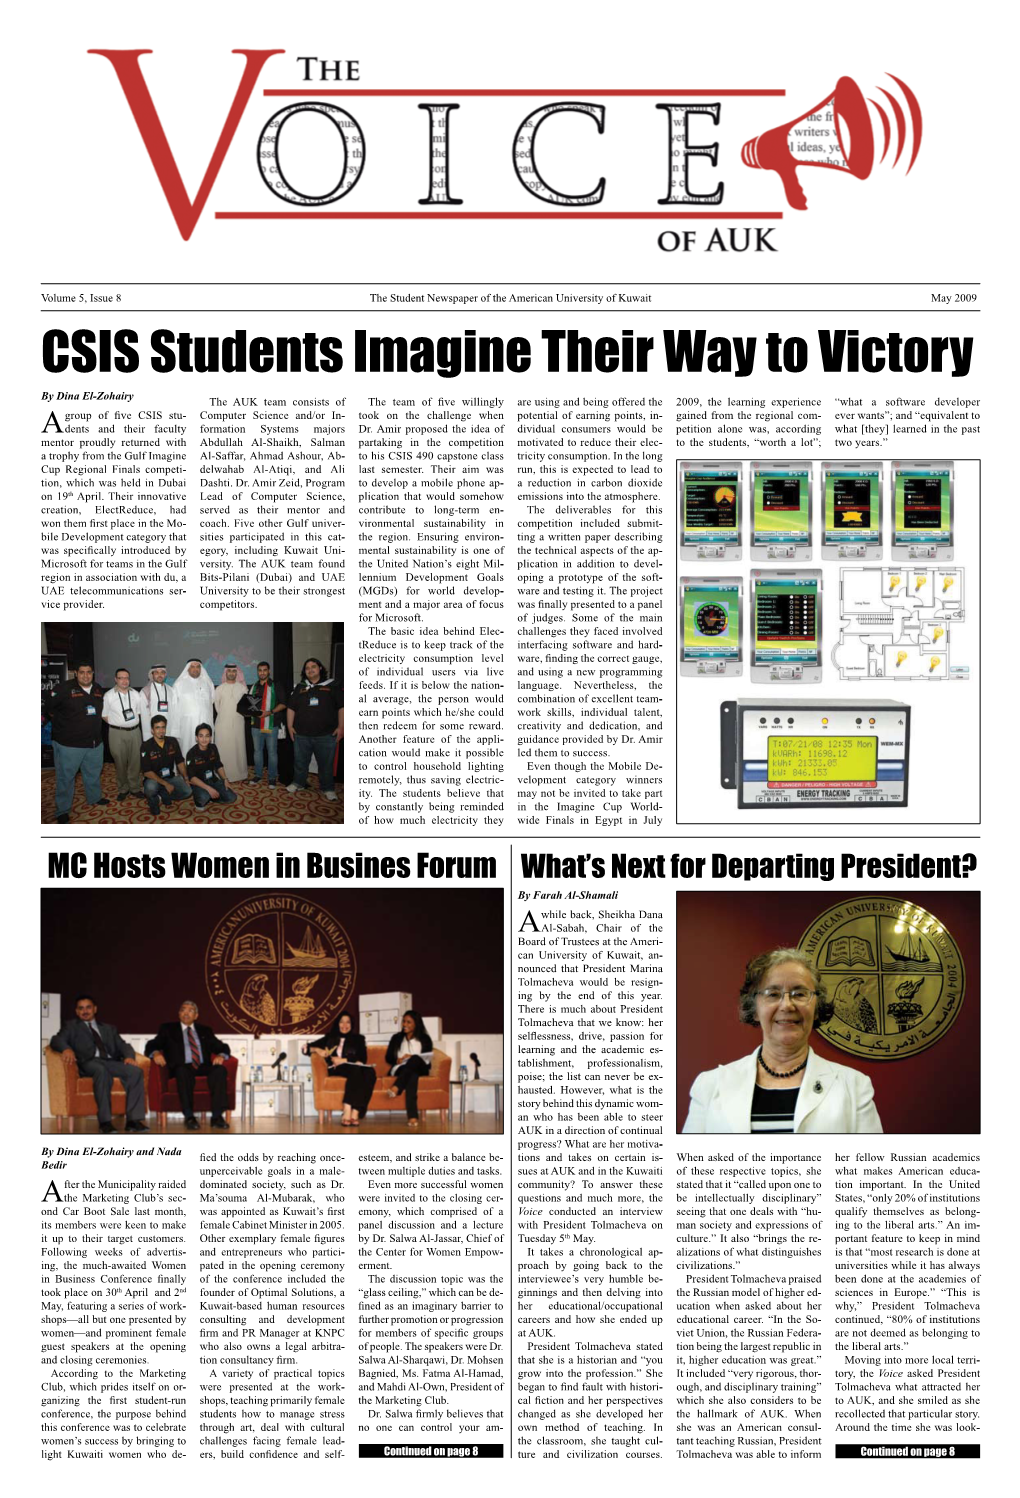 CSIS Students Imagine Their Way to Victory